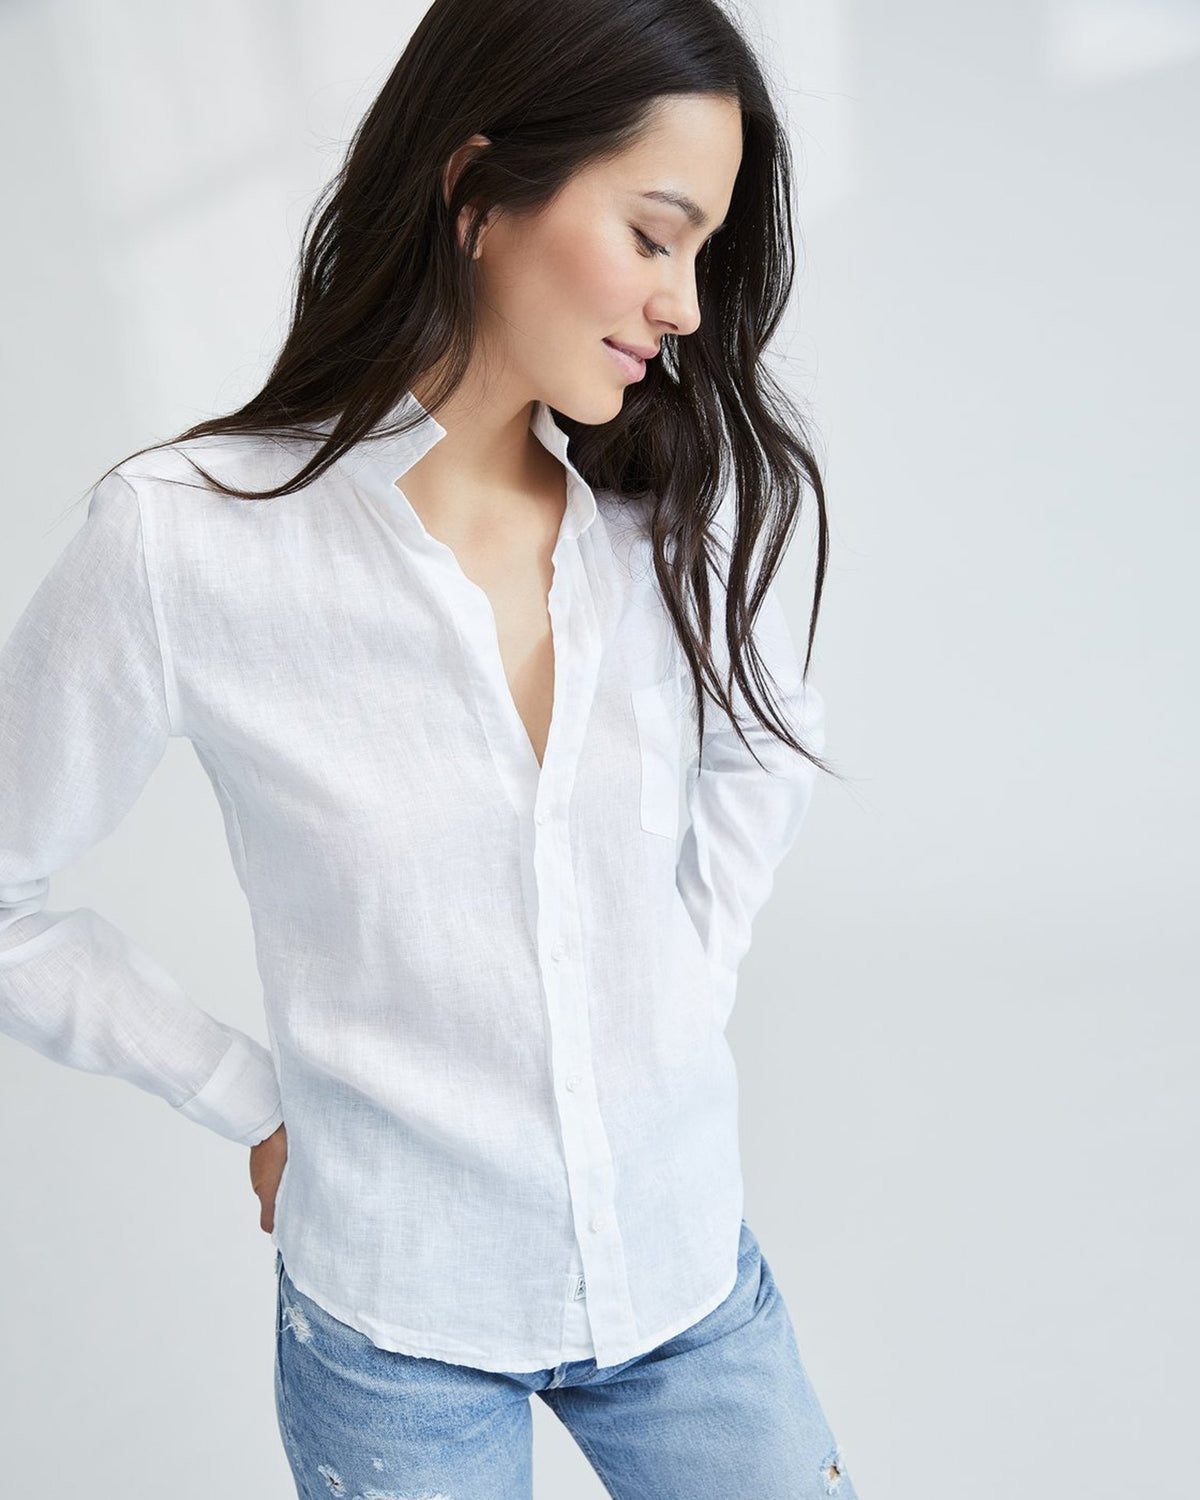 Frank & Eileen Clothing Barry Button Down in White Linen